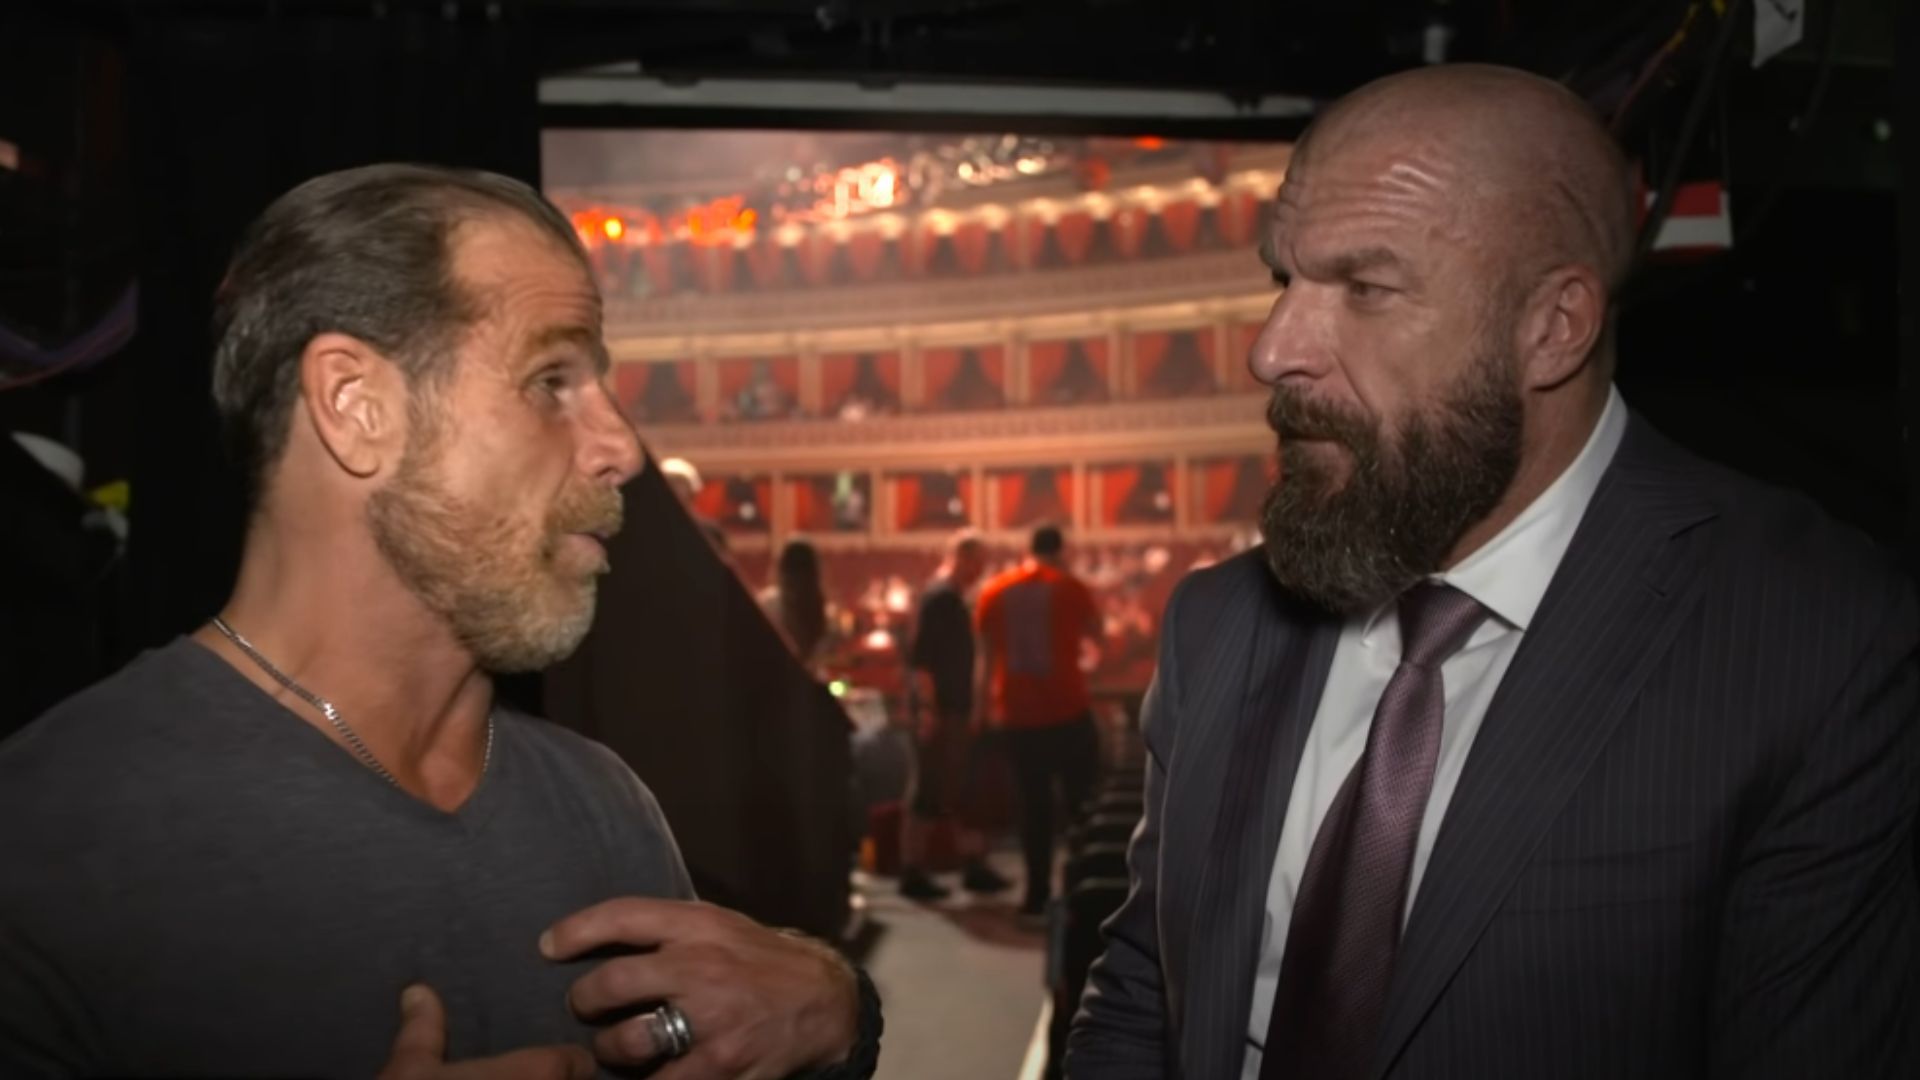 Shawn Michaels (left) and Triple H (right)